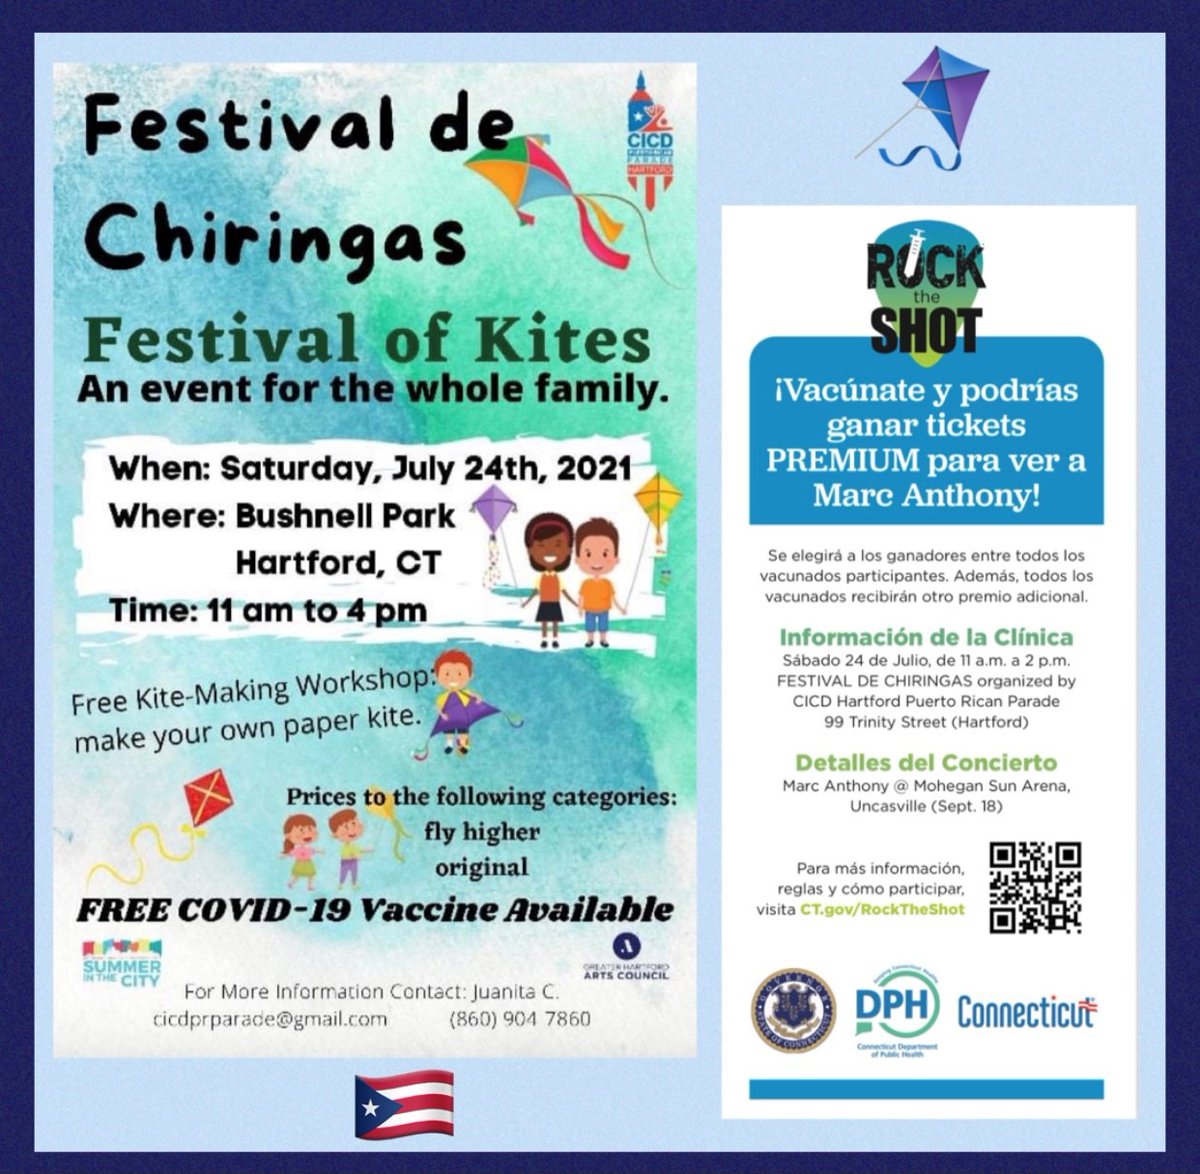 CICD Puerto Rican Parade, Inc. Hartford Chapter Presents Festival de Chiringas/Festival of Kites this Saturday at Bushnell Park! 🪁🧒🏽